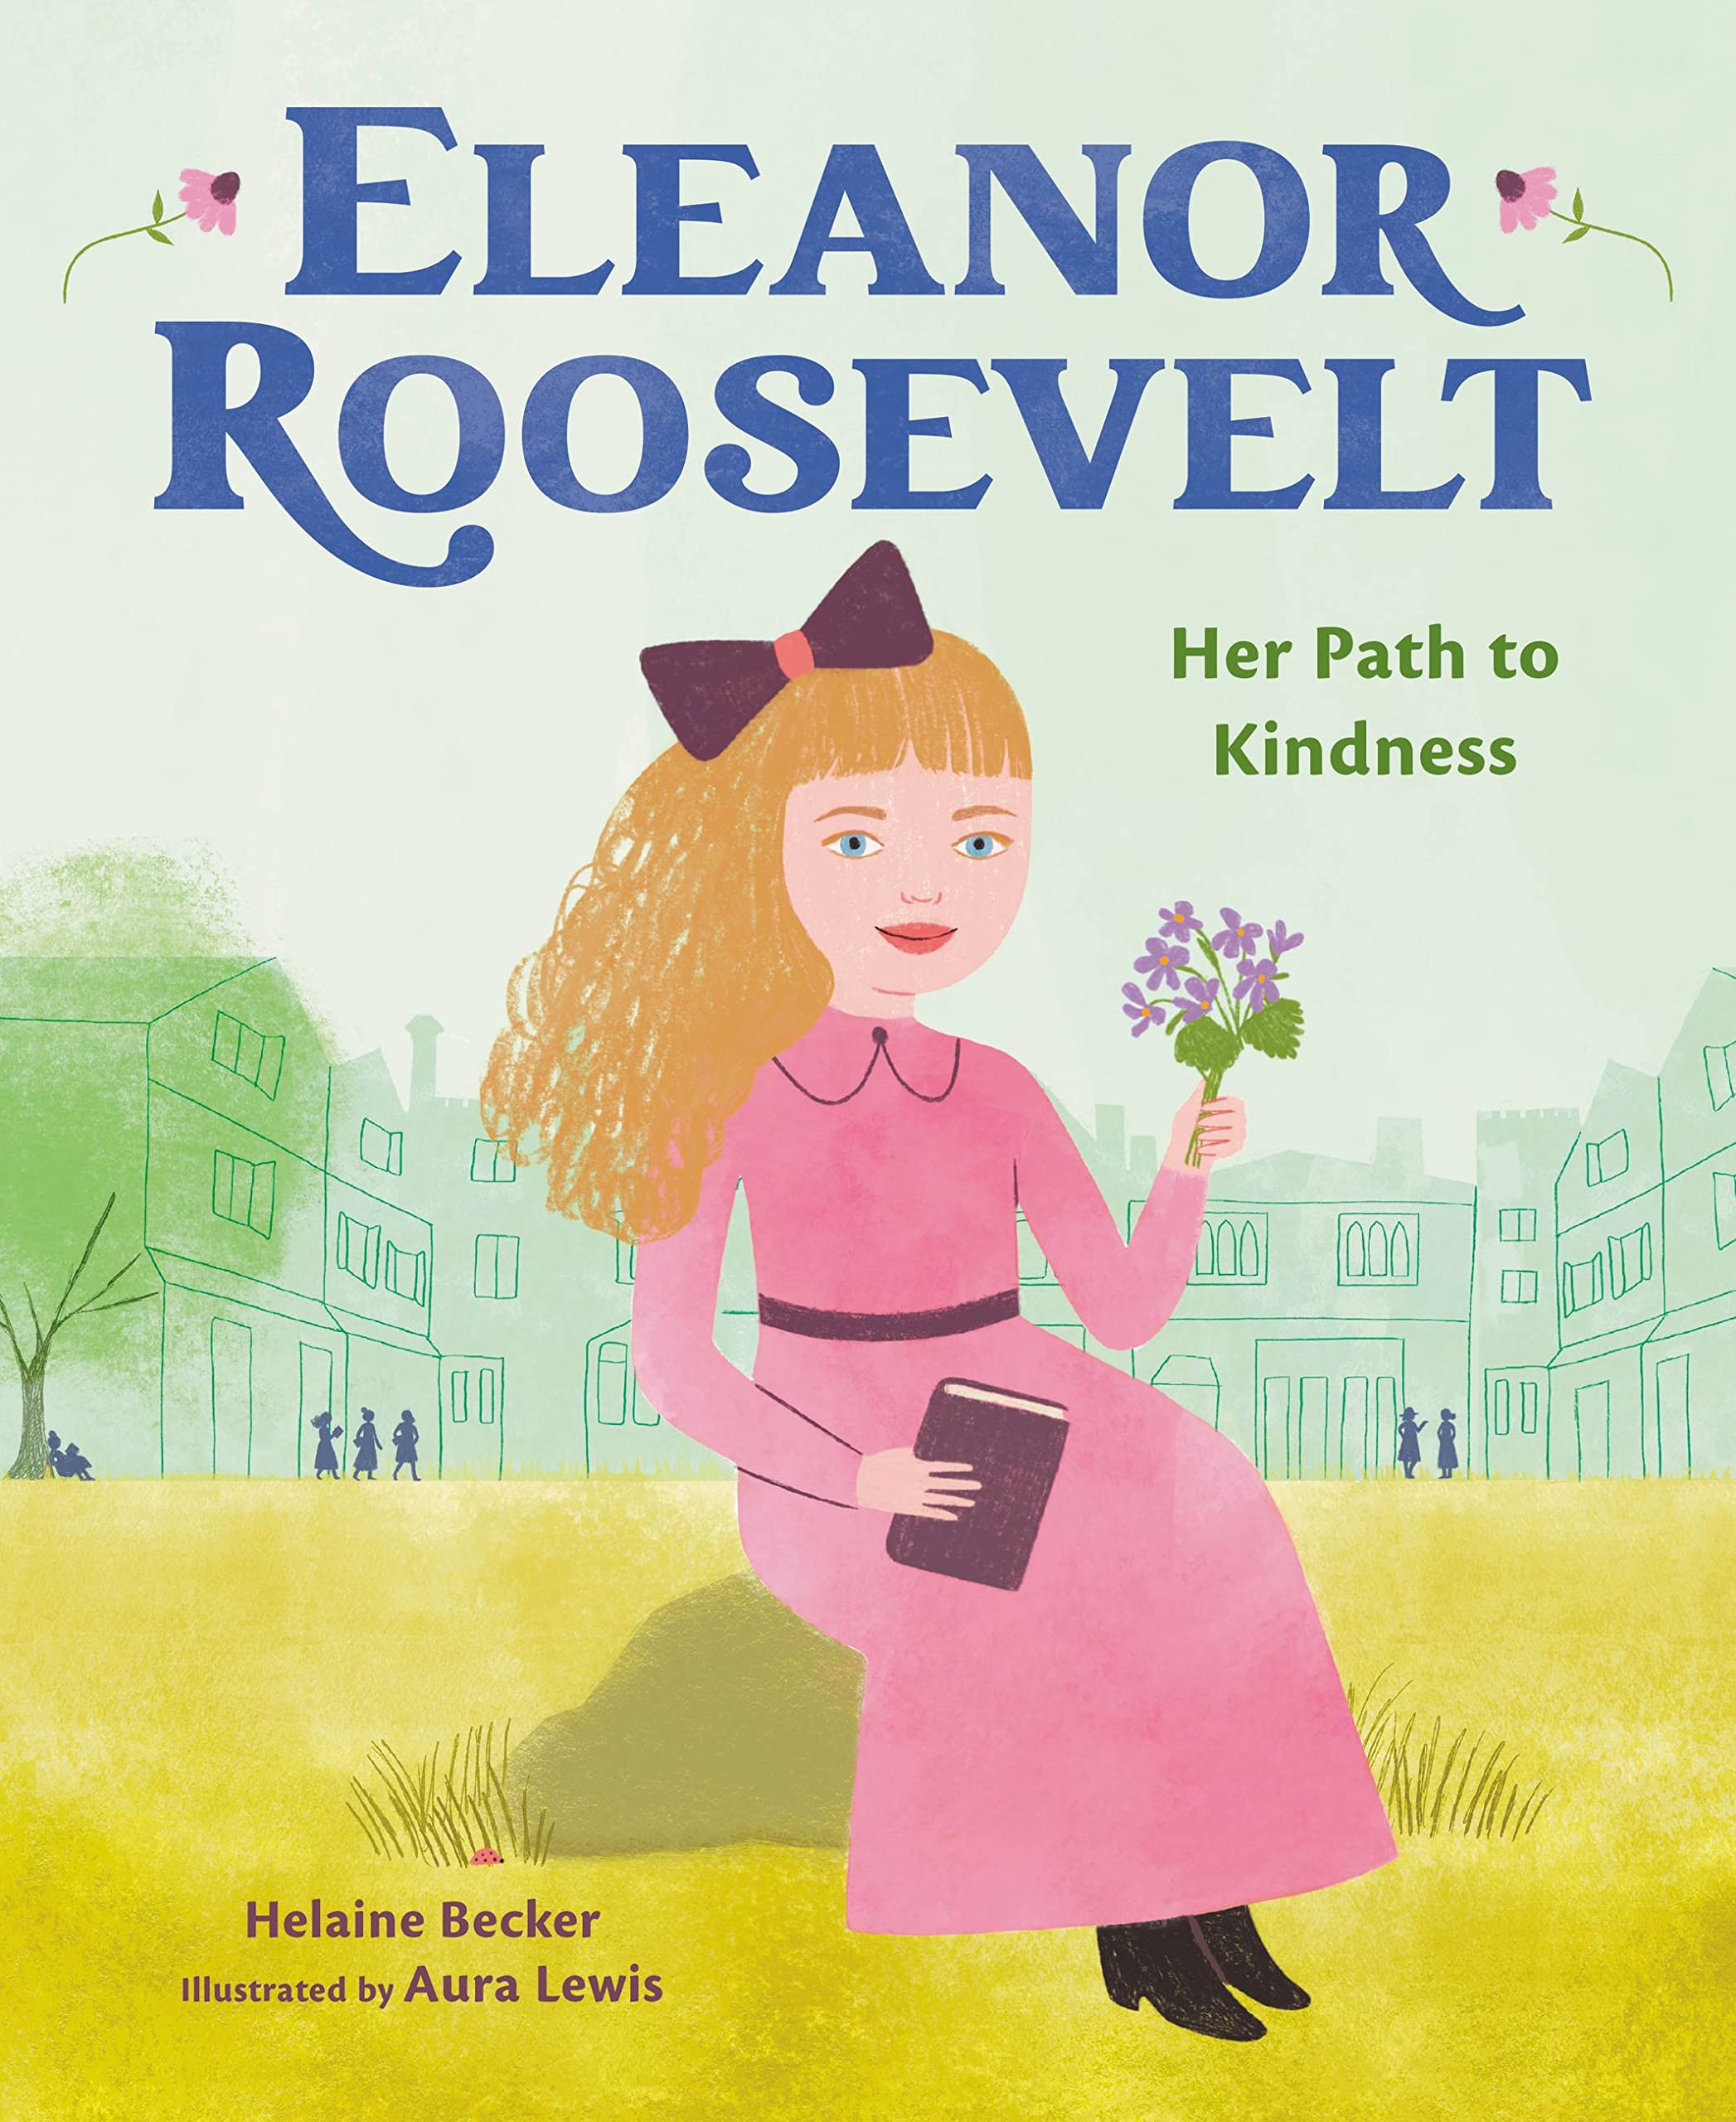 Eleanor Roosevelt: Her Path to Kindness